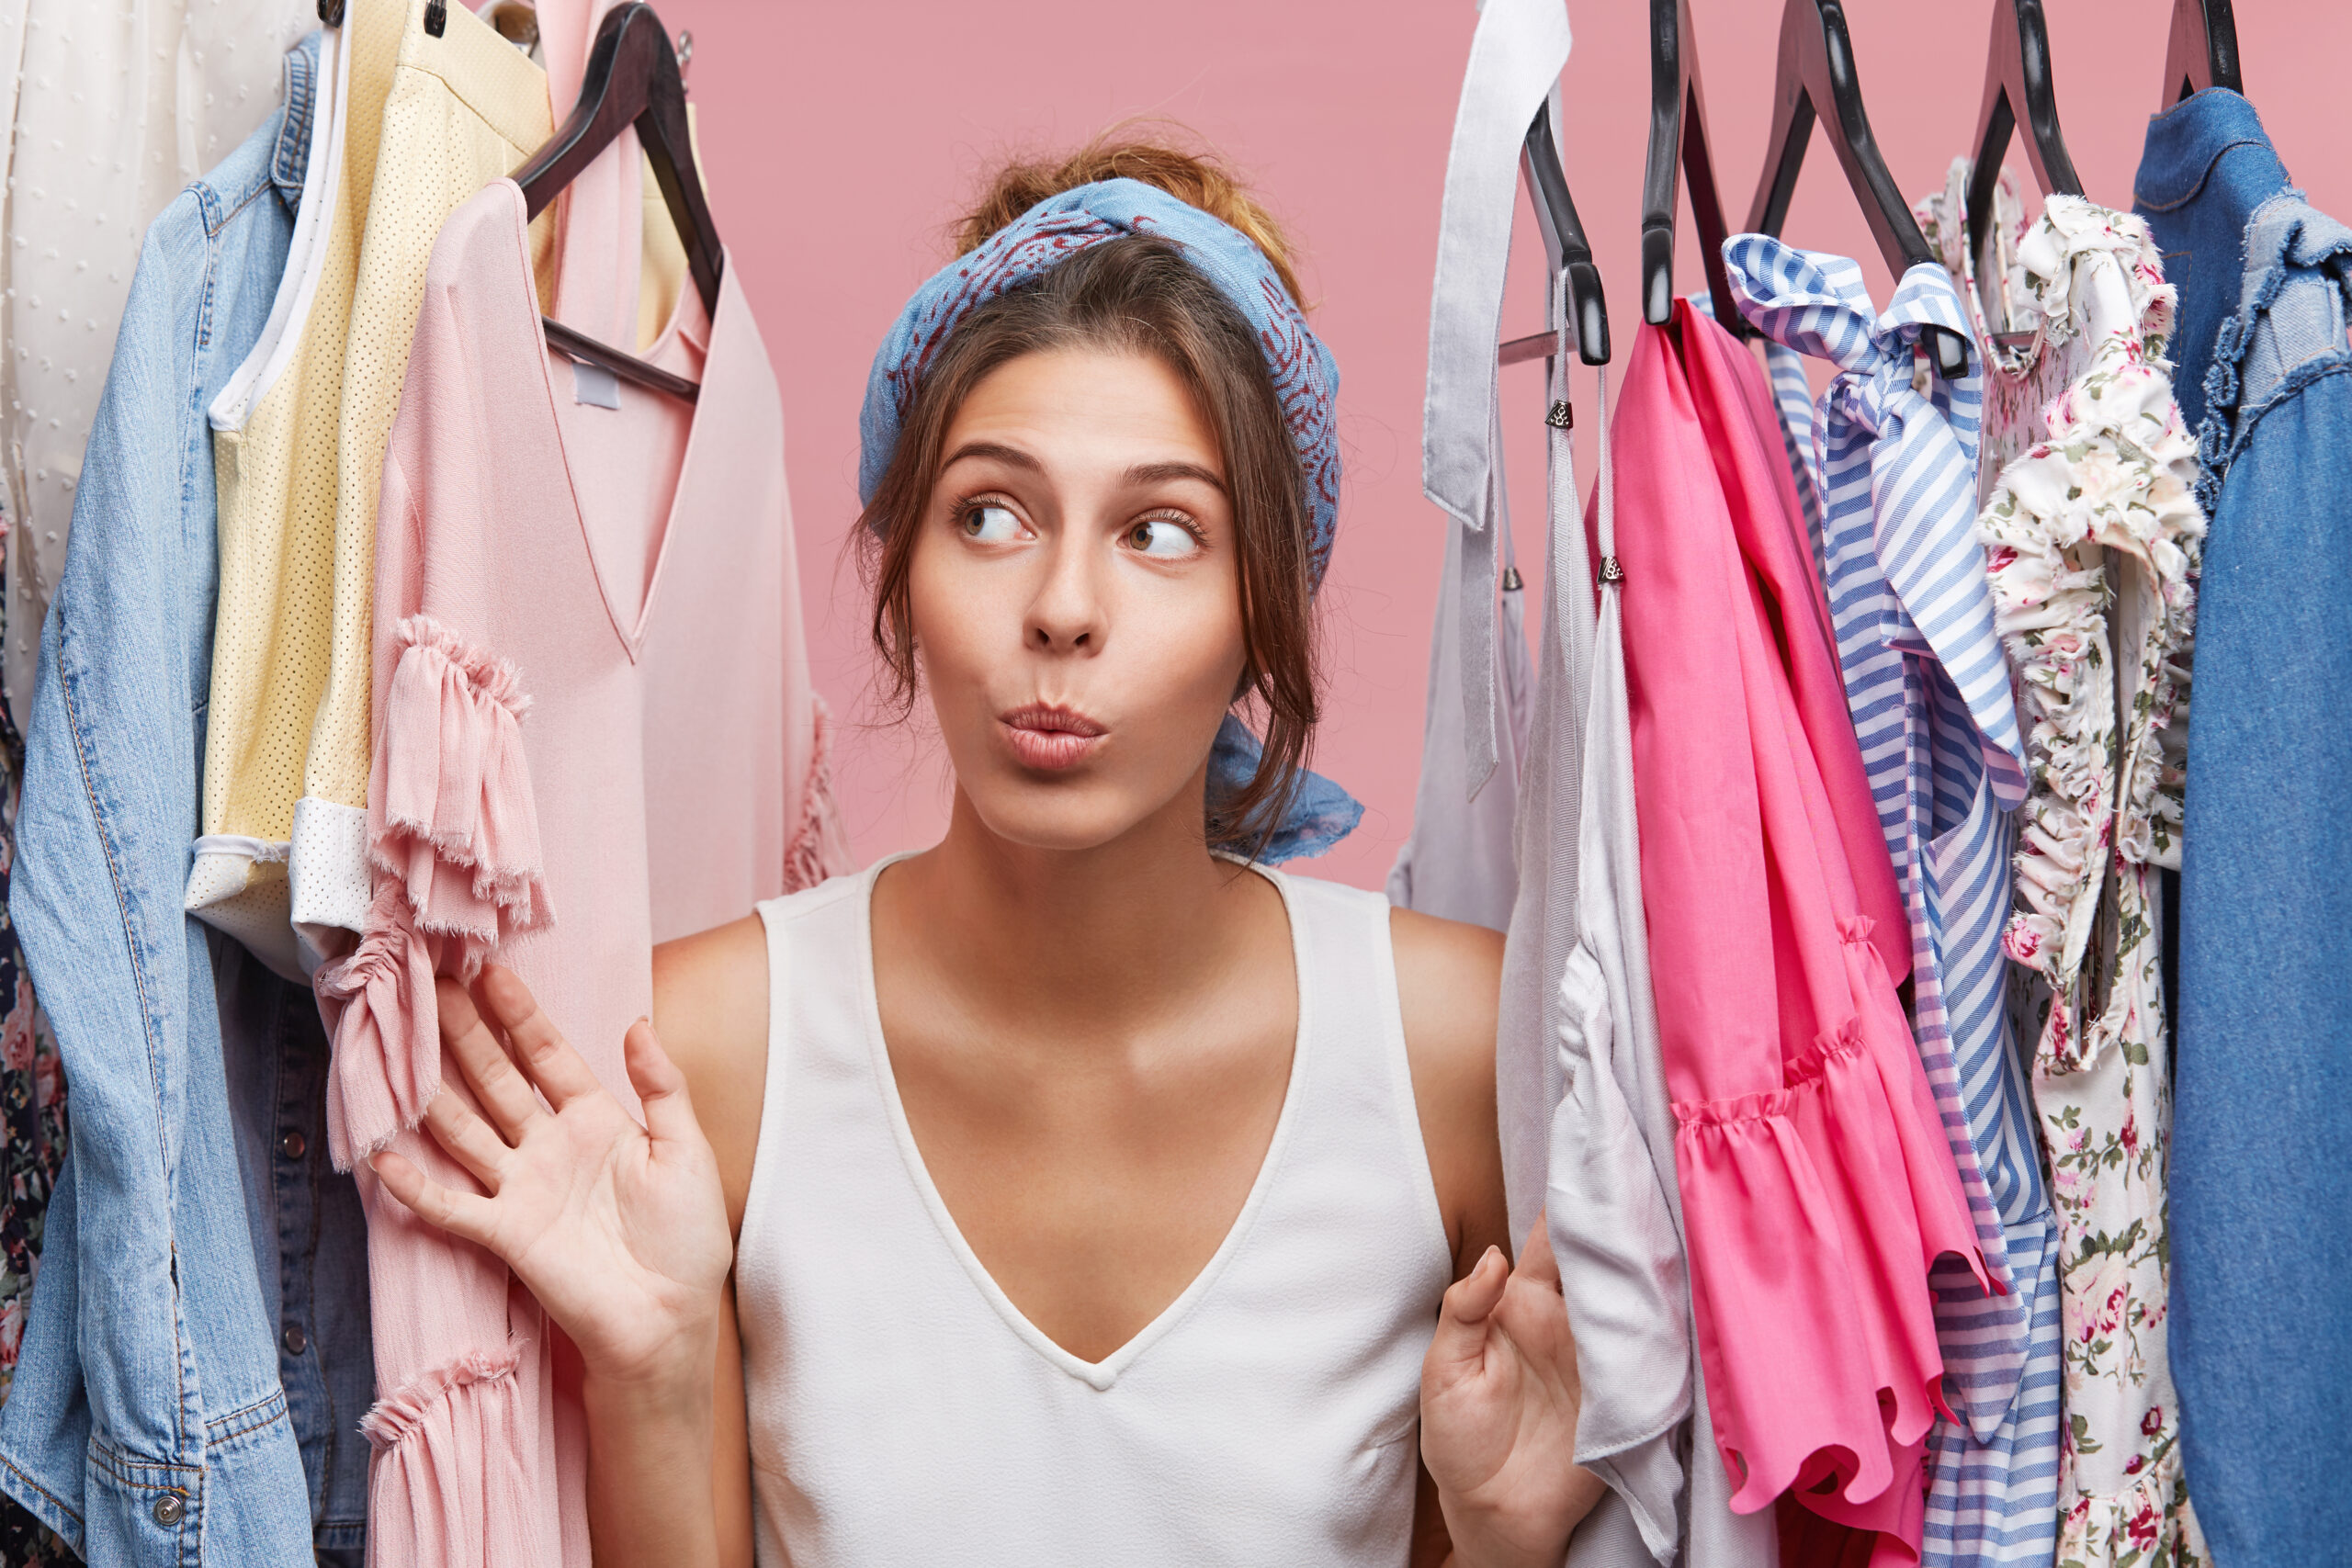 How to Style Your Clothing Store to Sell More Products